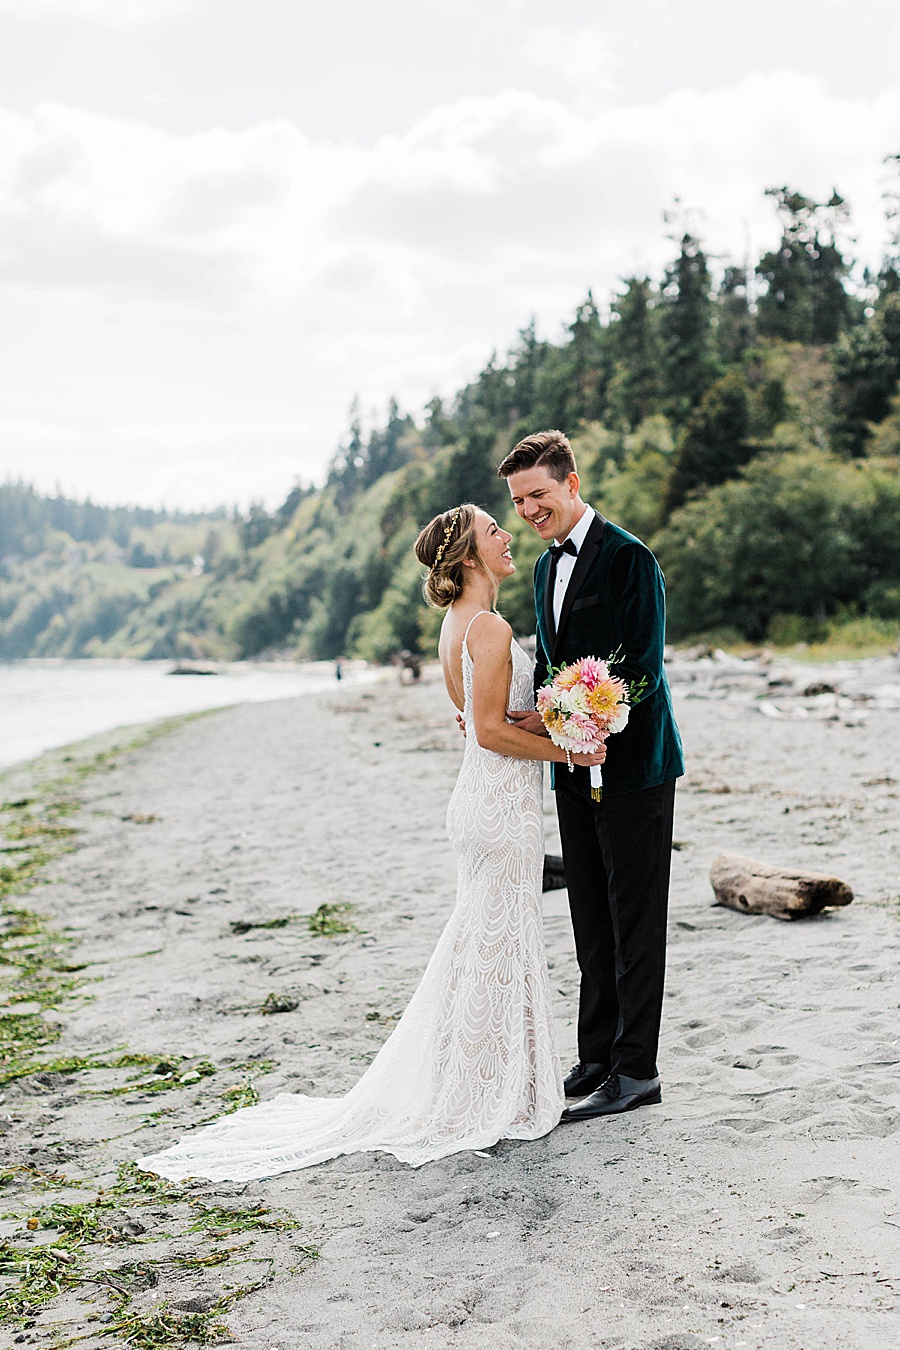 A groom embraces his bride on the beach at Point No Point in Washington, photographed by adventure wedding photographer Amy Galbraith